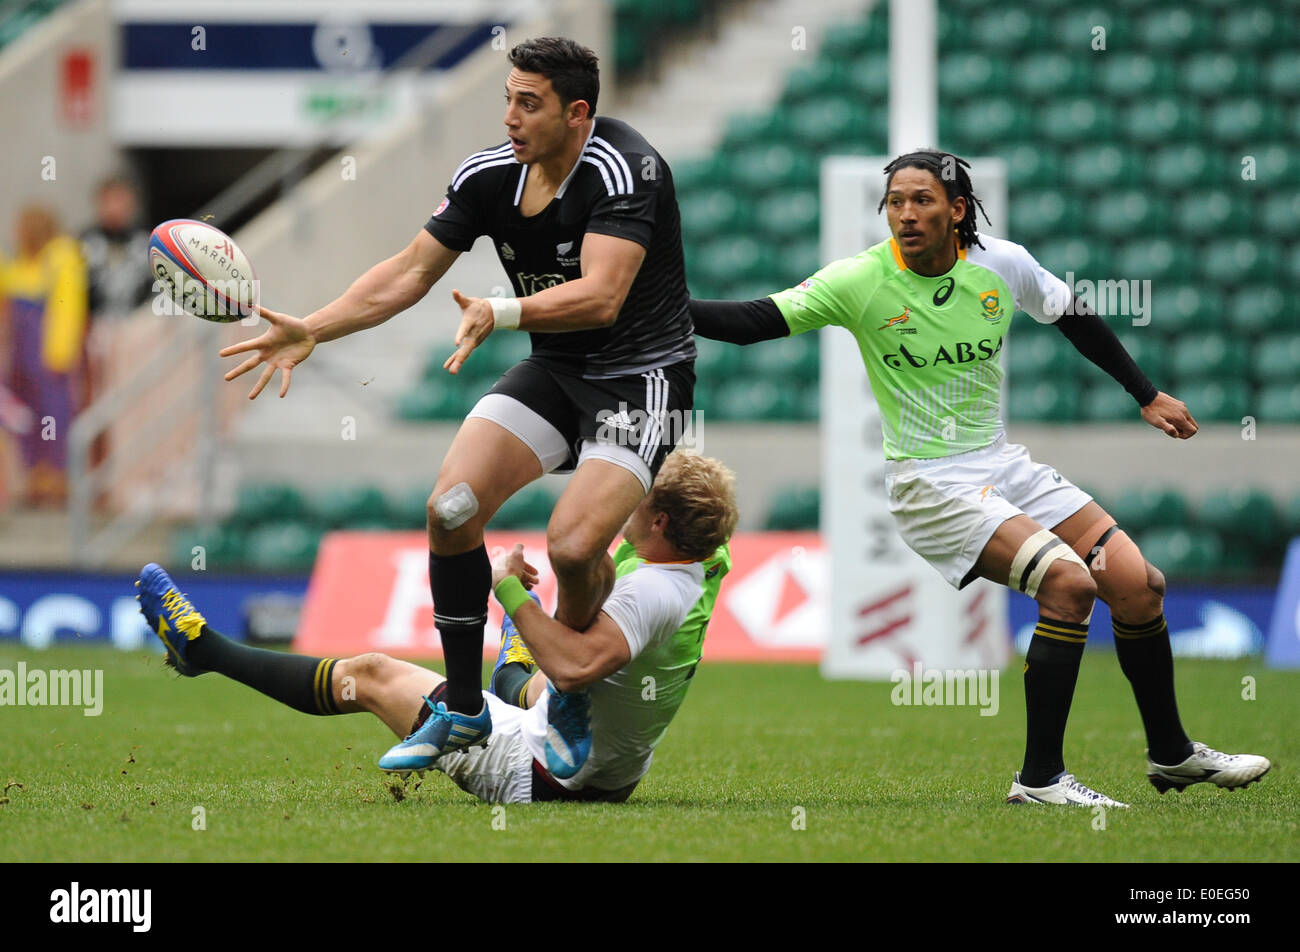 London, UK. 11 May 2014. Bryce Heem of New Zealand passes the ball as Philip Snyman and Justin Geduld try their best to tackle him during the Cup quarter final match between South Africa and New Zealand at the Marriott London Sevens rugby tournament being held at Twickenham Rugby Stadium in London as part of the HSBC Sevens World Series. Photo by Roger Sedres/ImageSA Stock Photo